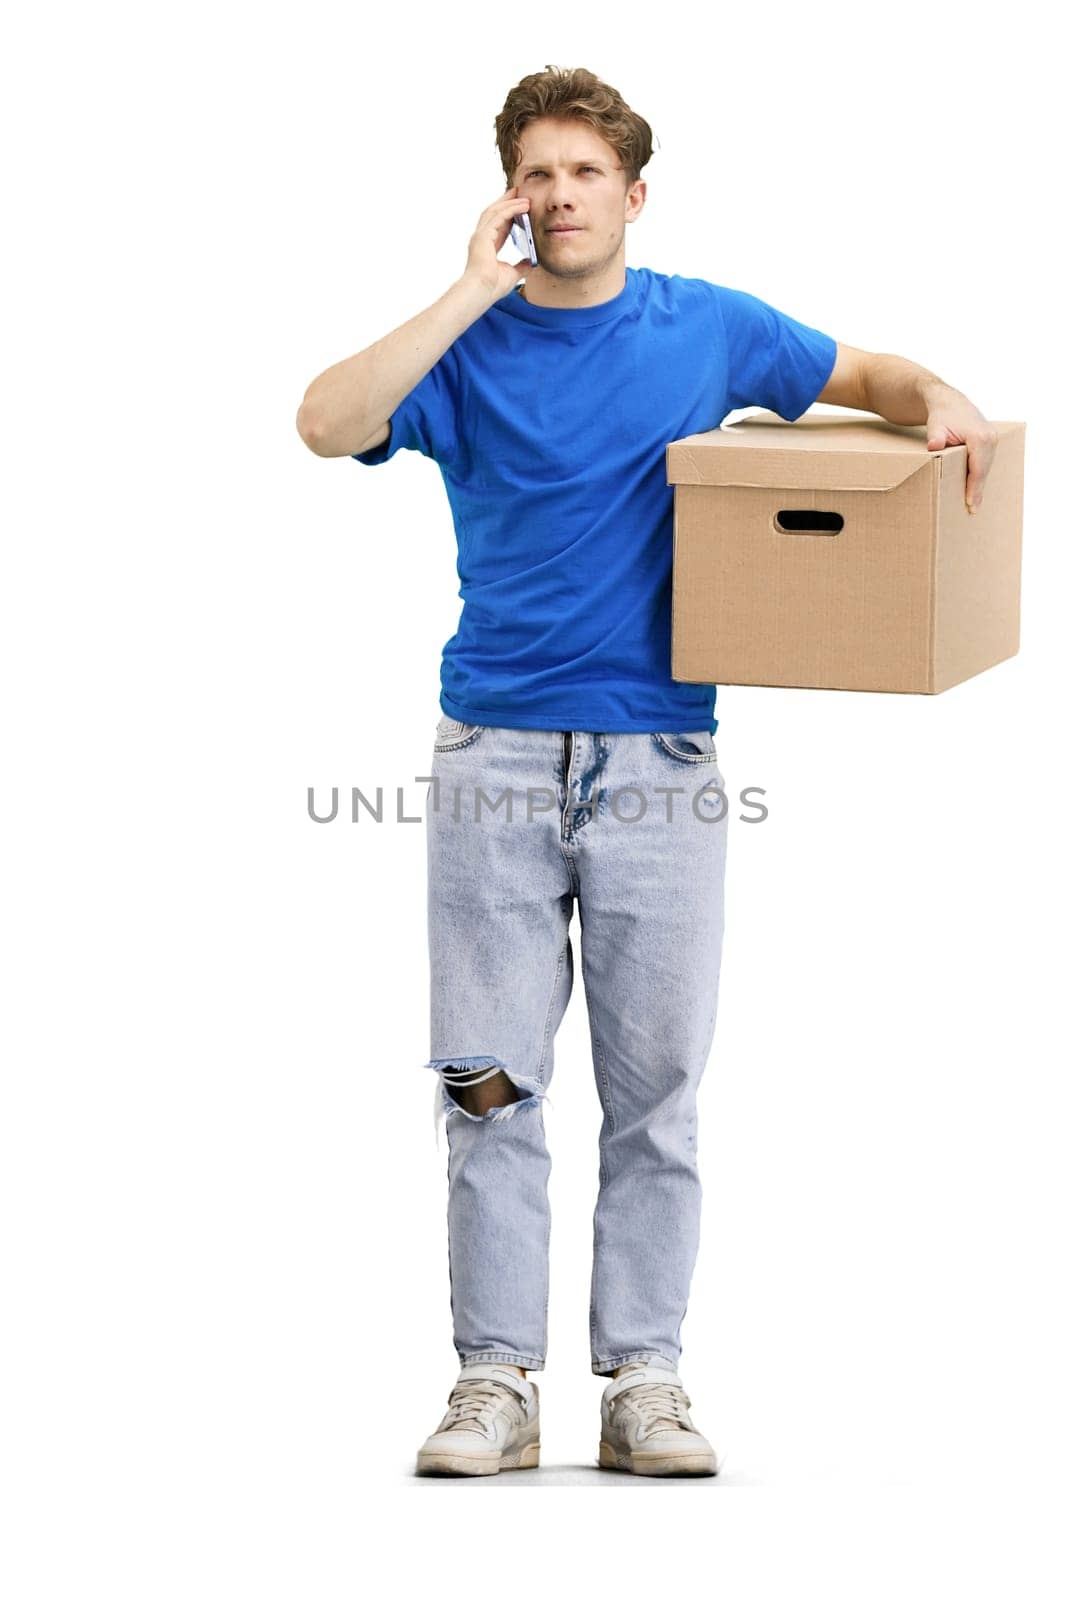 The deliveryman, in full height, on a white background, with a box, talking on the phone.